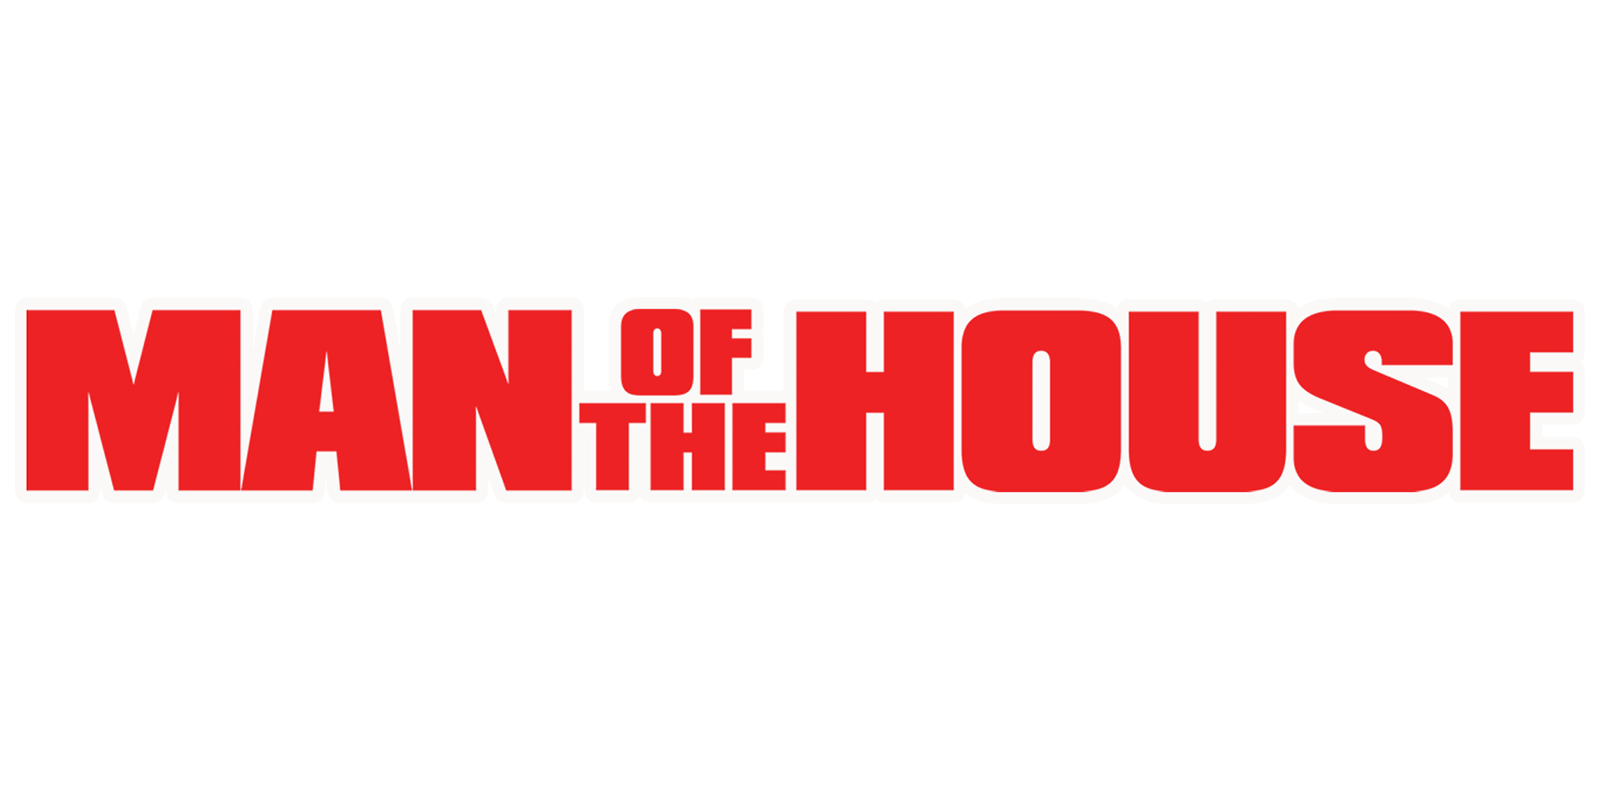 man of the house meaning